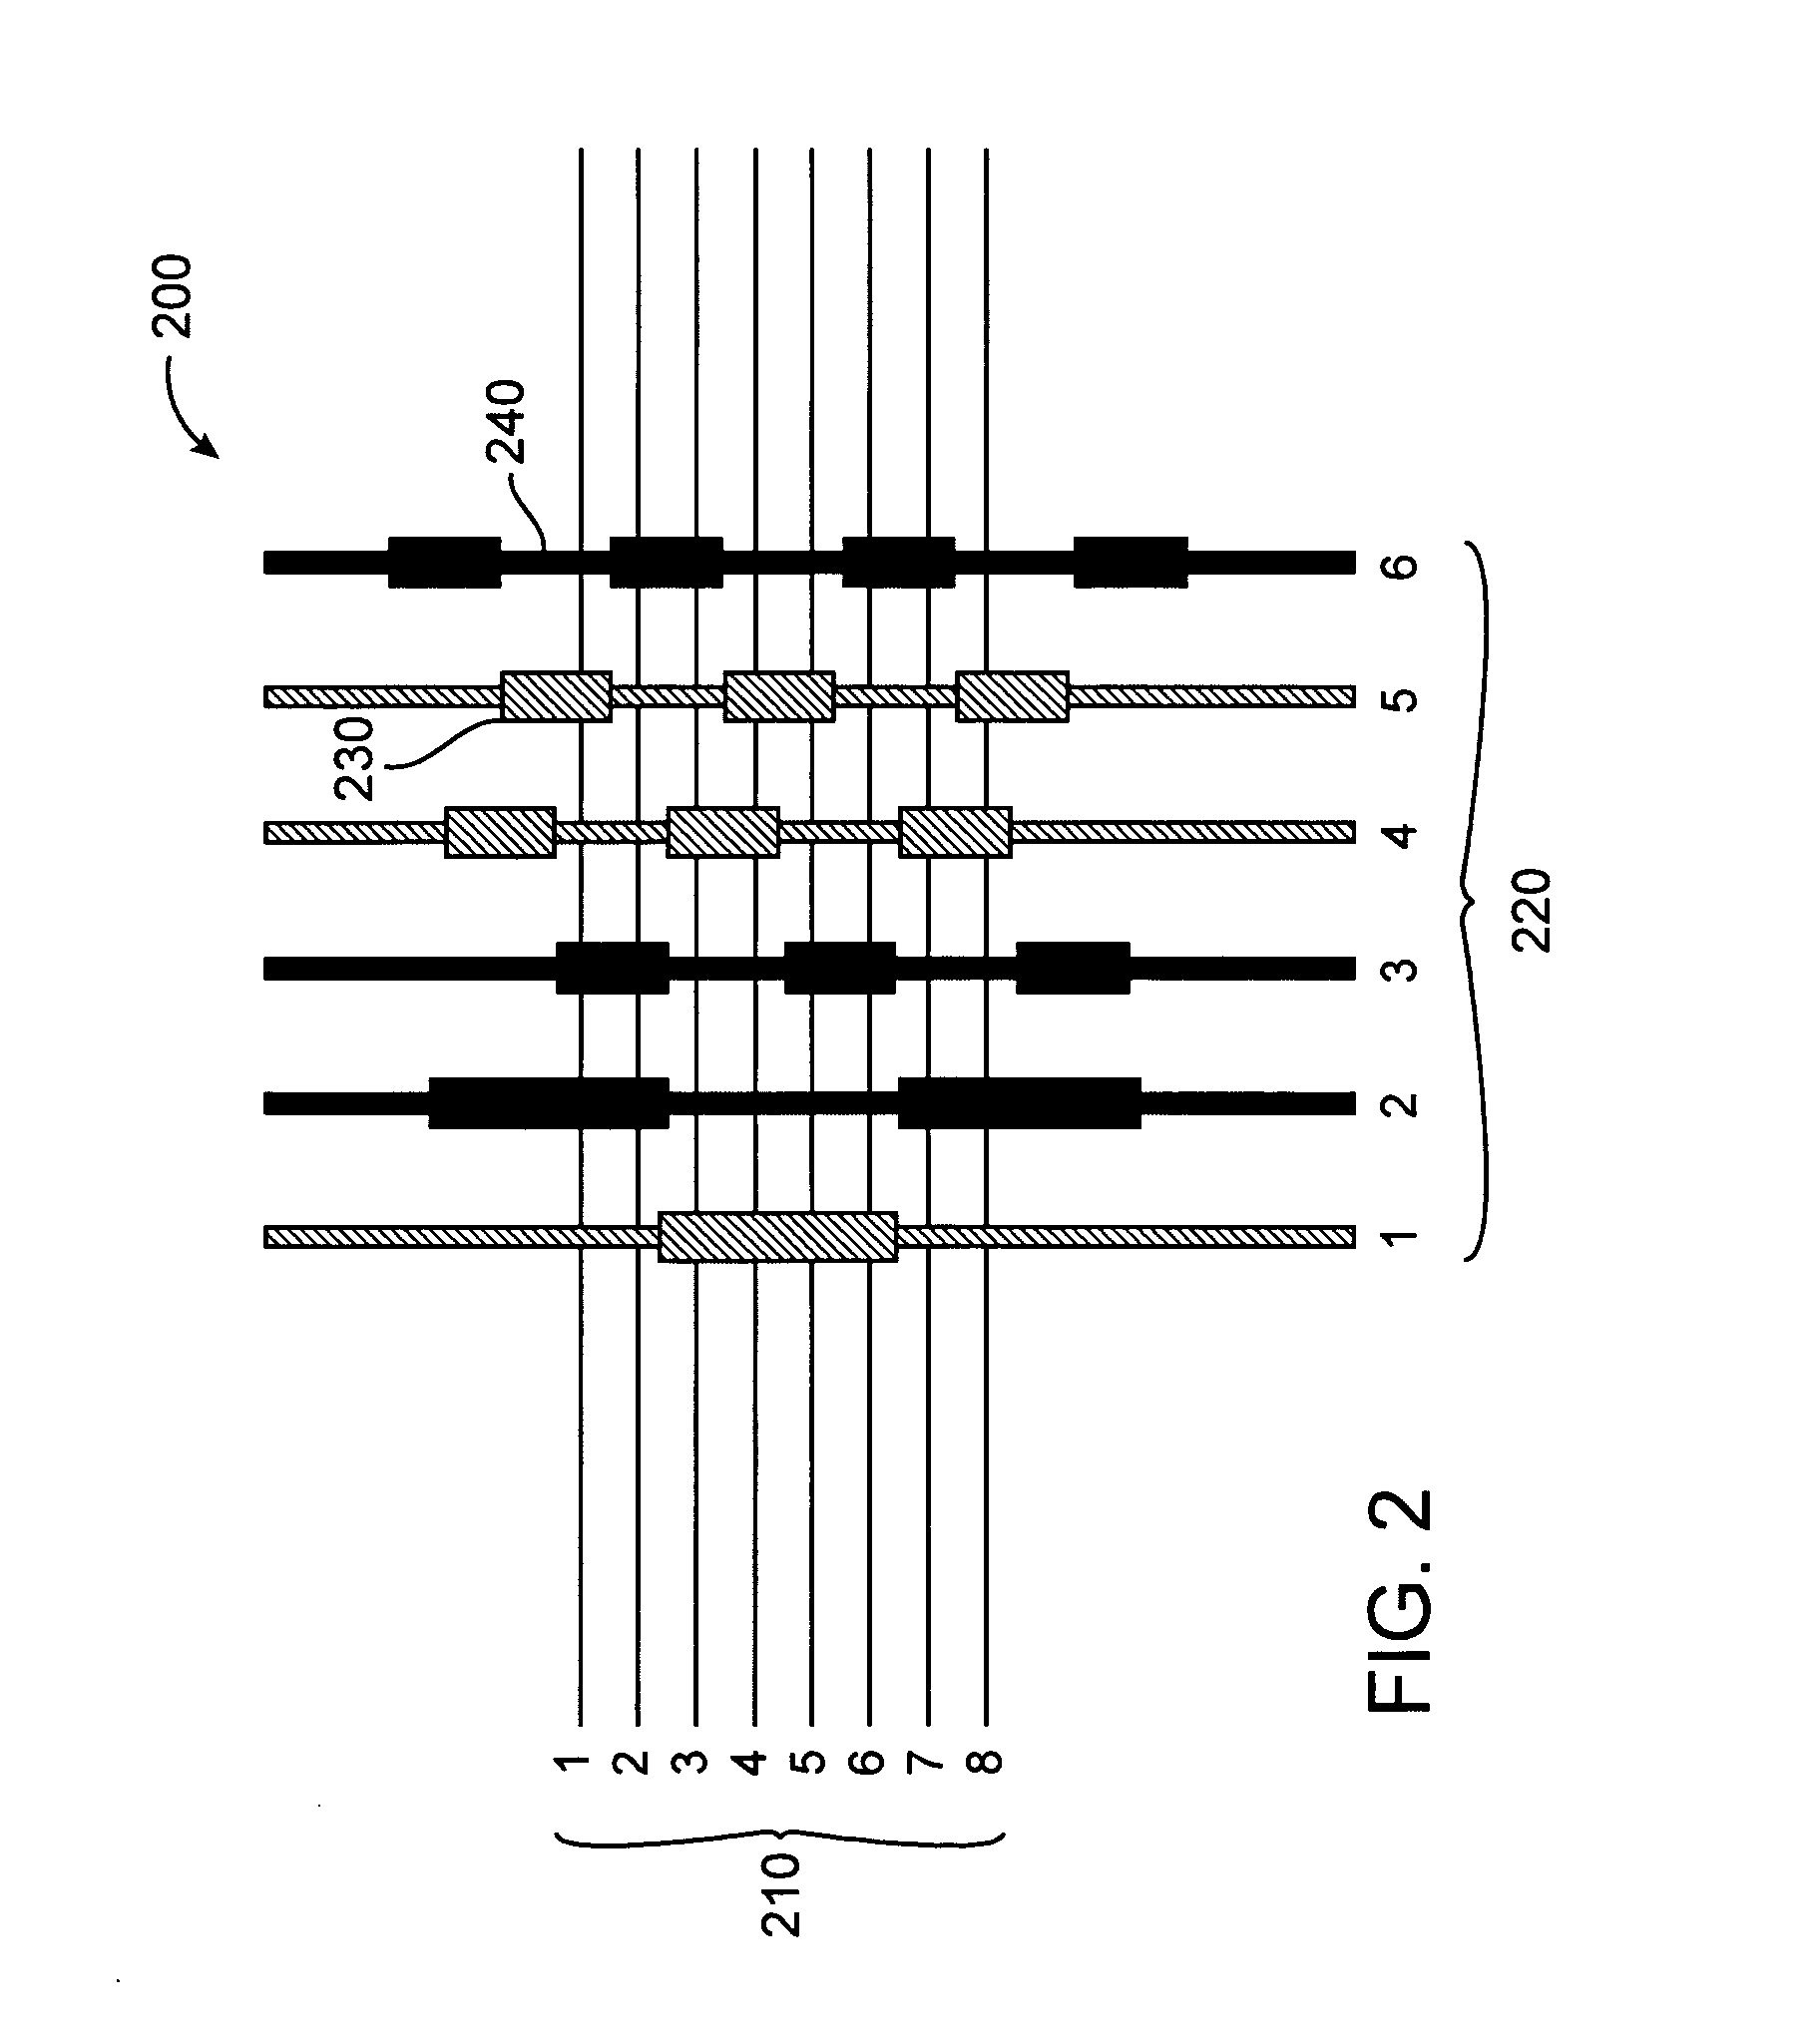 System and method based on field-effect transistors for addressing nanometer-scale devices